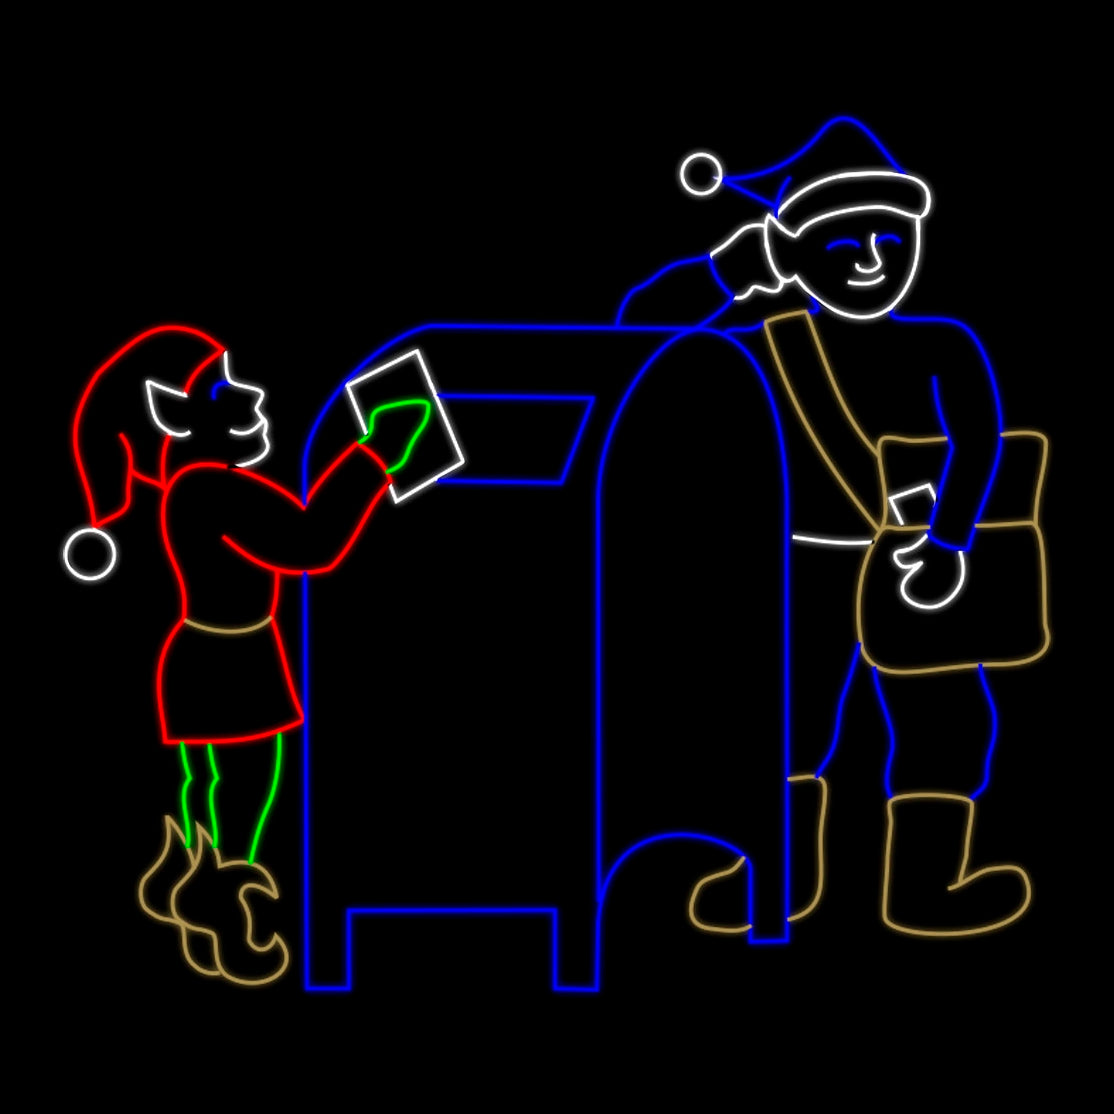 Christmas Elves with Mail Silhouette LED Display featuring two cheerful elves delivering mail. The display is outlined in bright red, green, blue, and white LED lights. One elf is shown posting a Christmas letter into a large mailbox while the other elf stands nearby with a mailbag. The vibrant lights stand out against a black background, making this display ideal for commercial Christmas decorations.